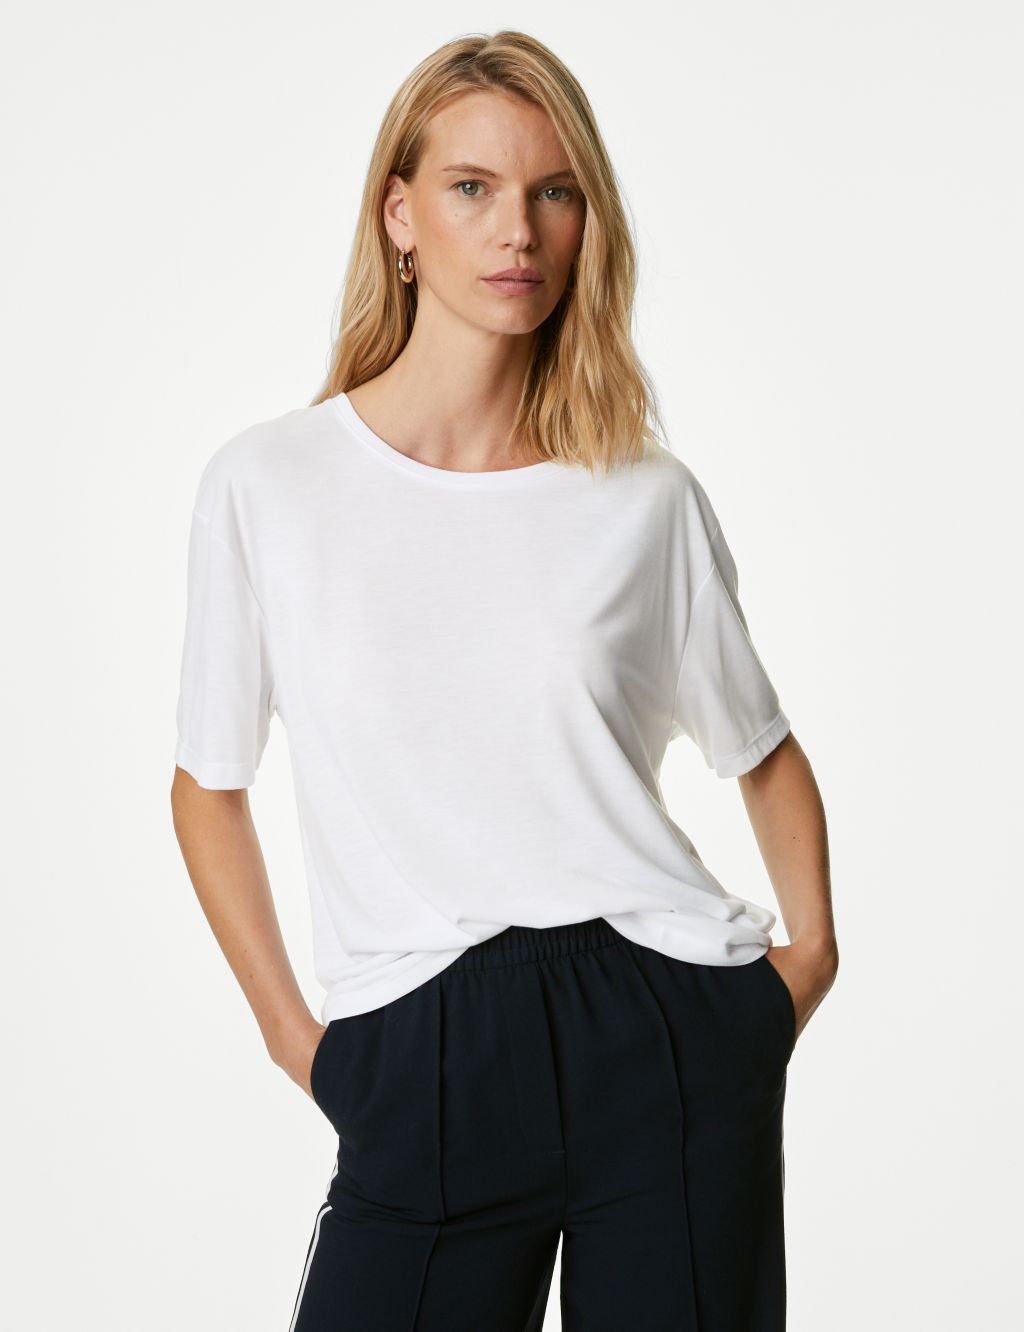 Relaxed Short Sleeve T-Shirt image 4